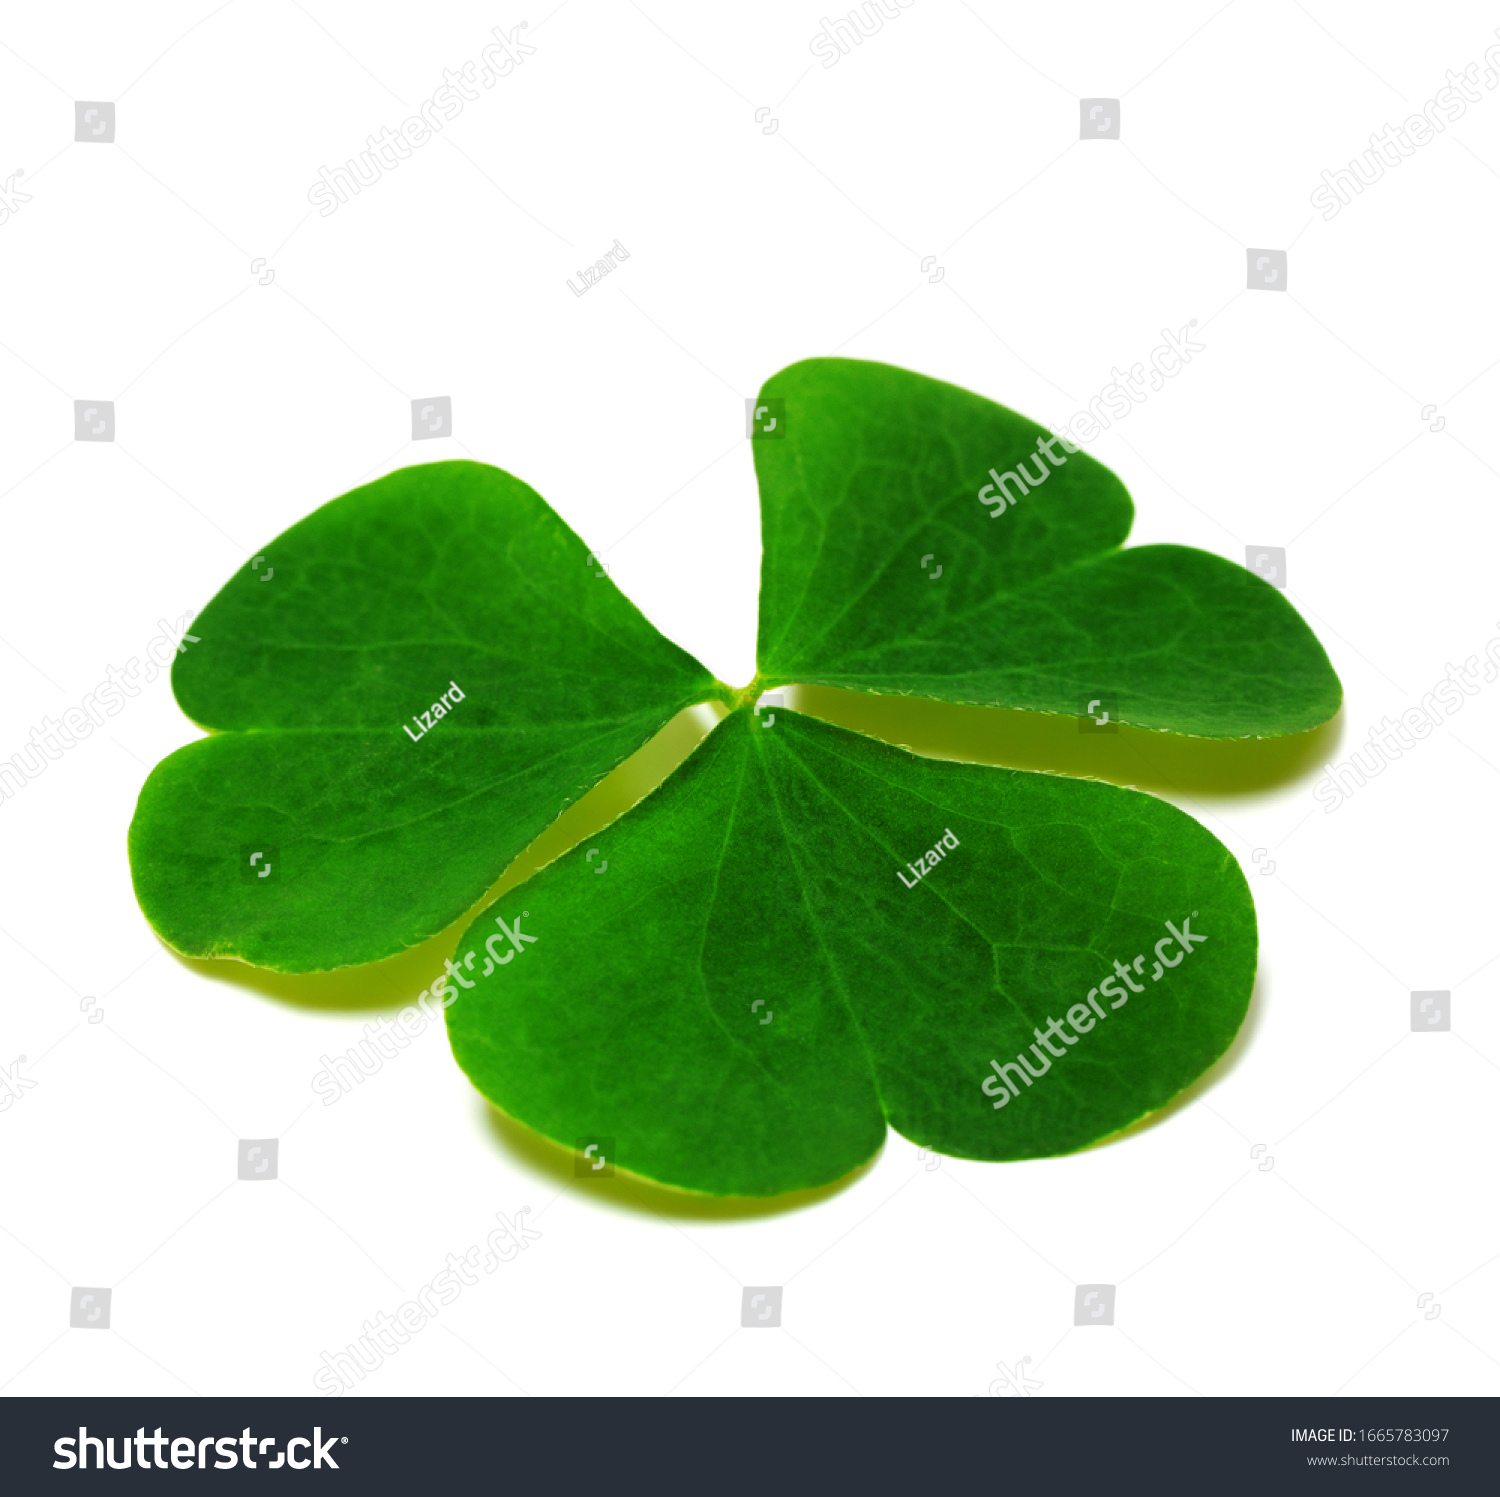 Spring clover leaf isolated on white background with shadow. Green three-leaved shamrock - symbol of Saint Patricks Day. Close-up view. #1665783097